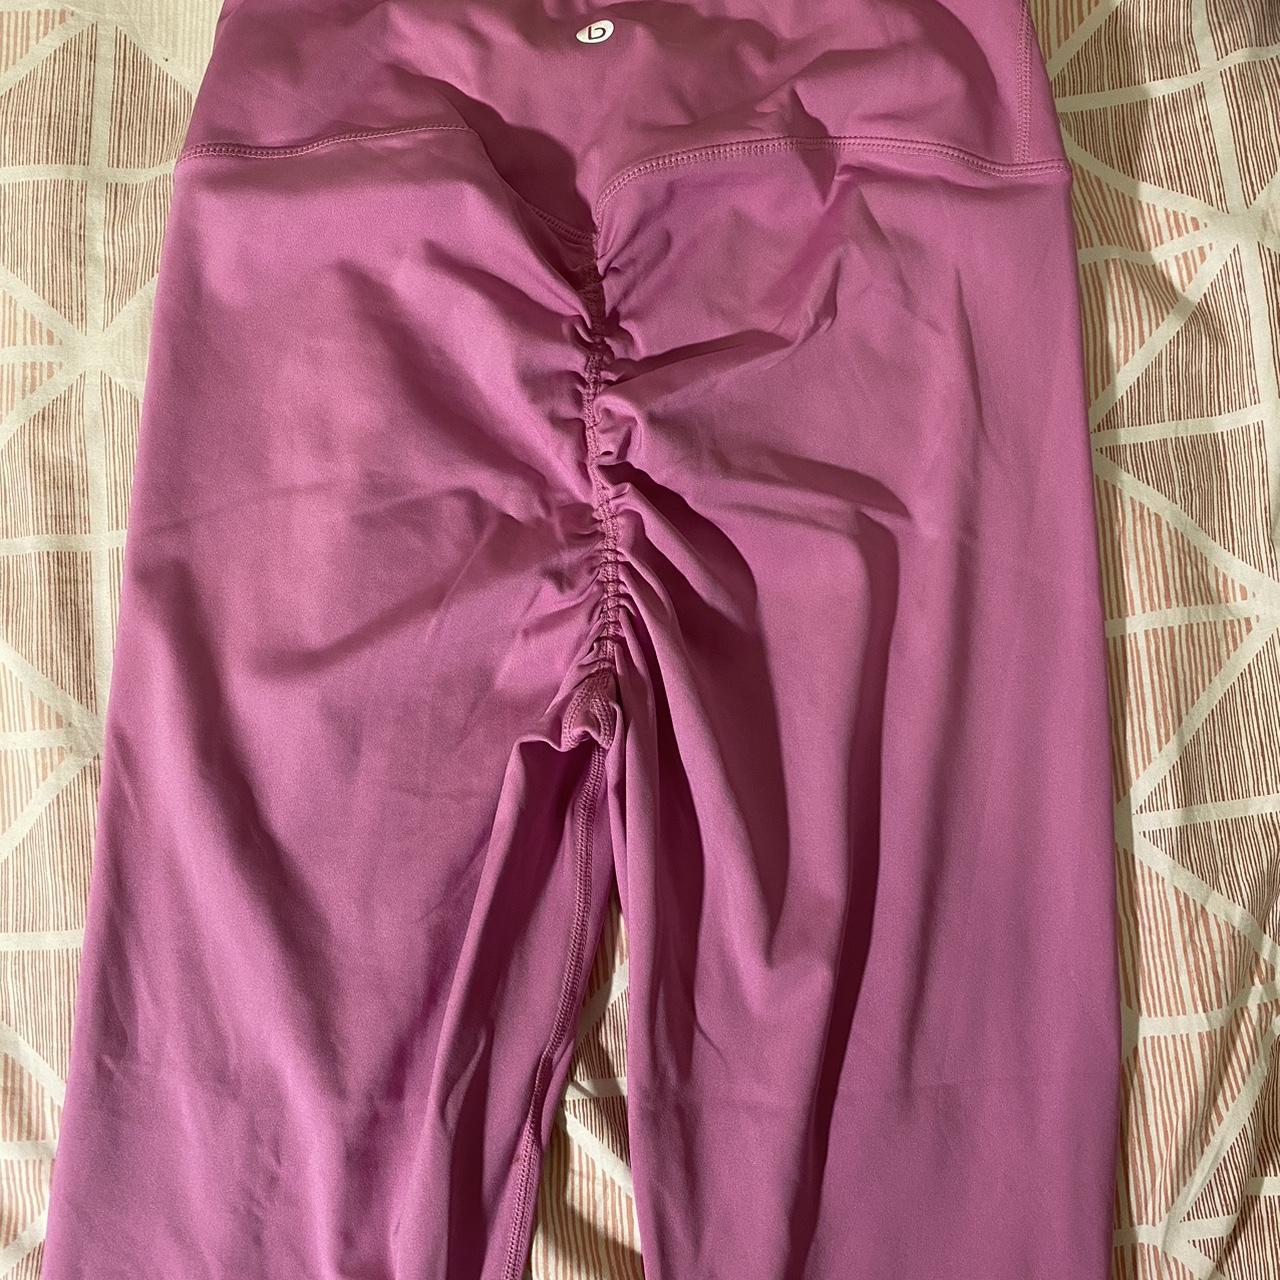 Cotton on scrunch bum tights size M once - Depop